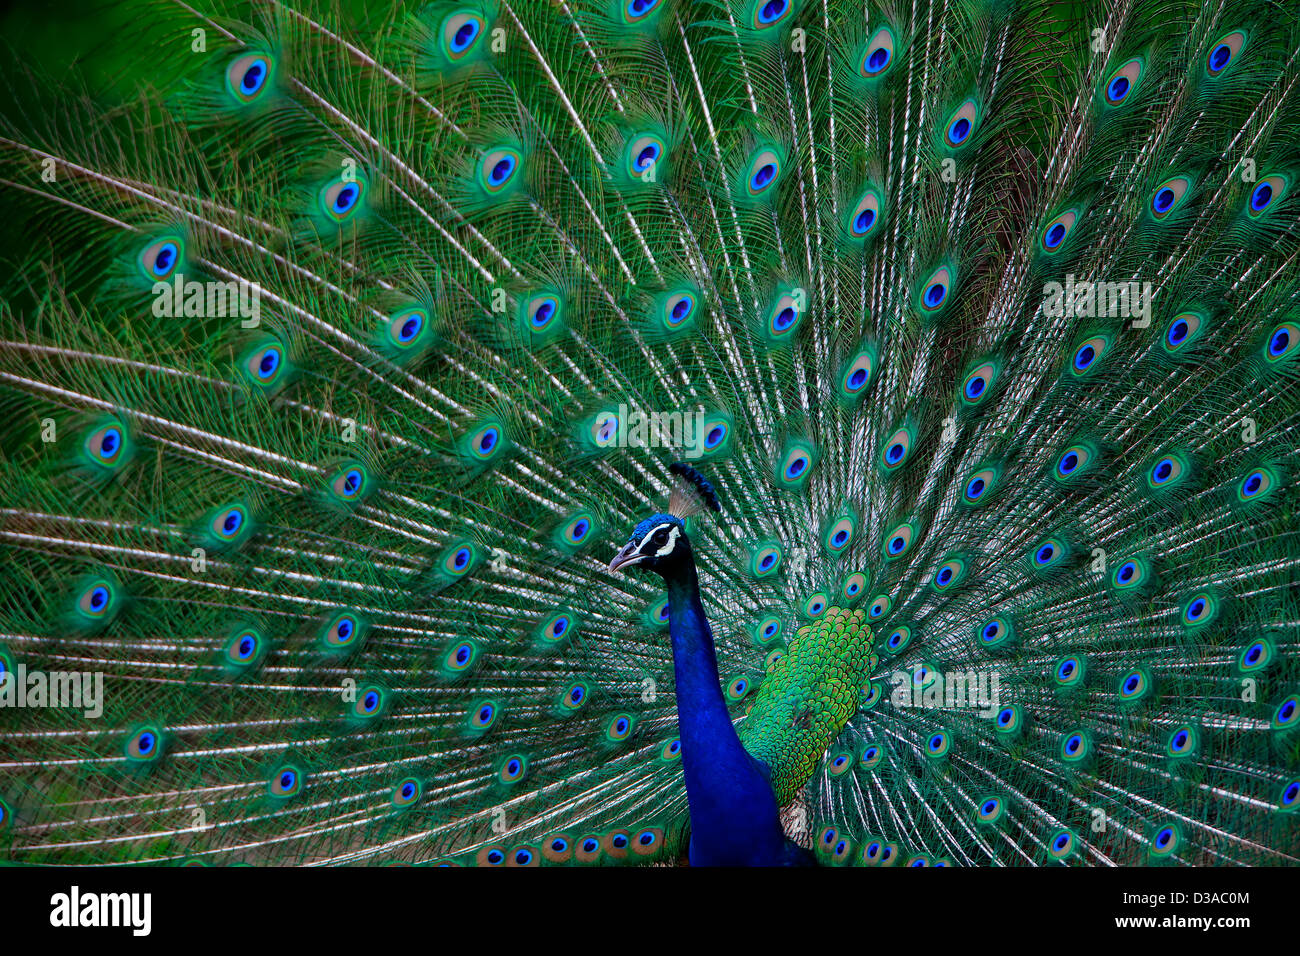 Male Peacock,Bird,Nature,Feather,Colour Image.Backgrounds,Animal,Vibrant Color,Dating,Close-up,Animals In The Wild,Mating Dance. Stock Photo